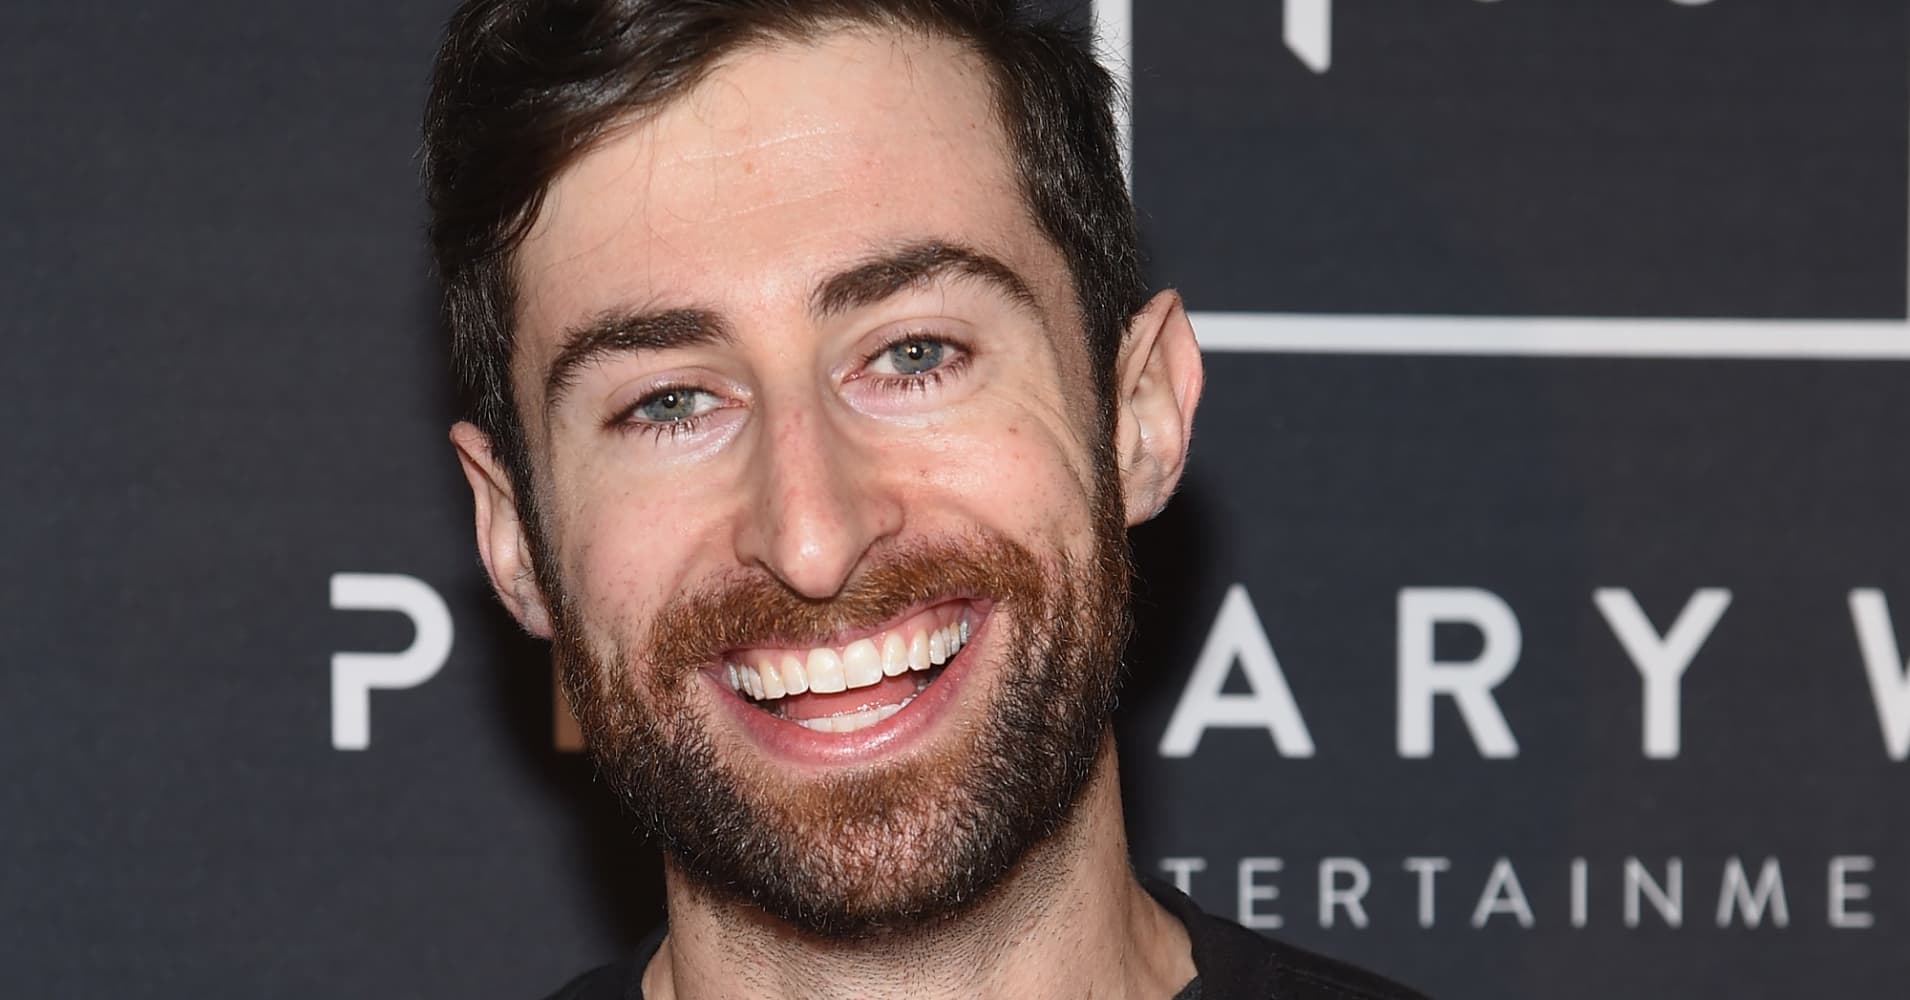 Before HQ Trivia, comedian Scott Rogowsky lived with his parents